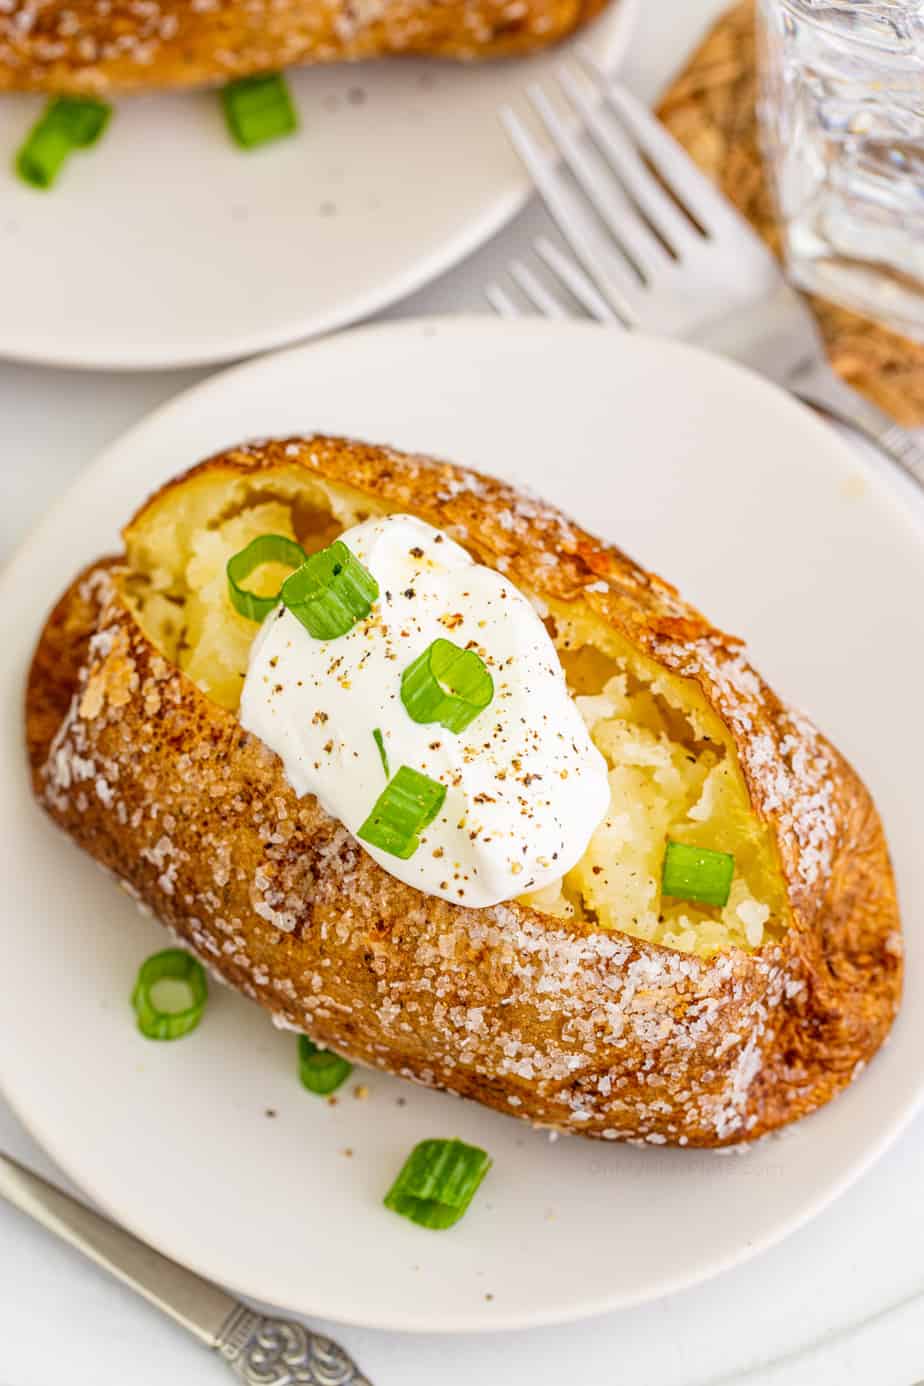 Baked potato with sour cream topping on a plate